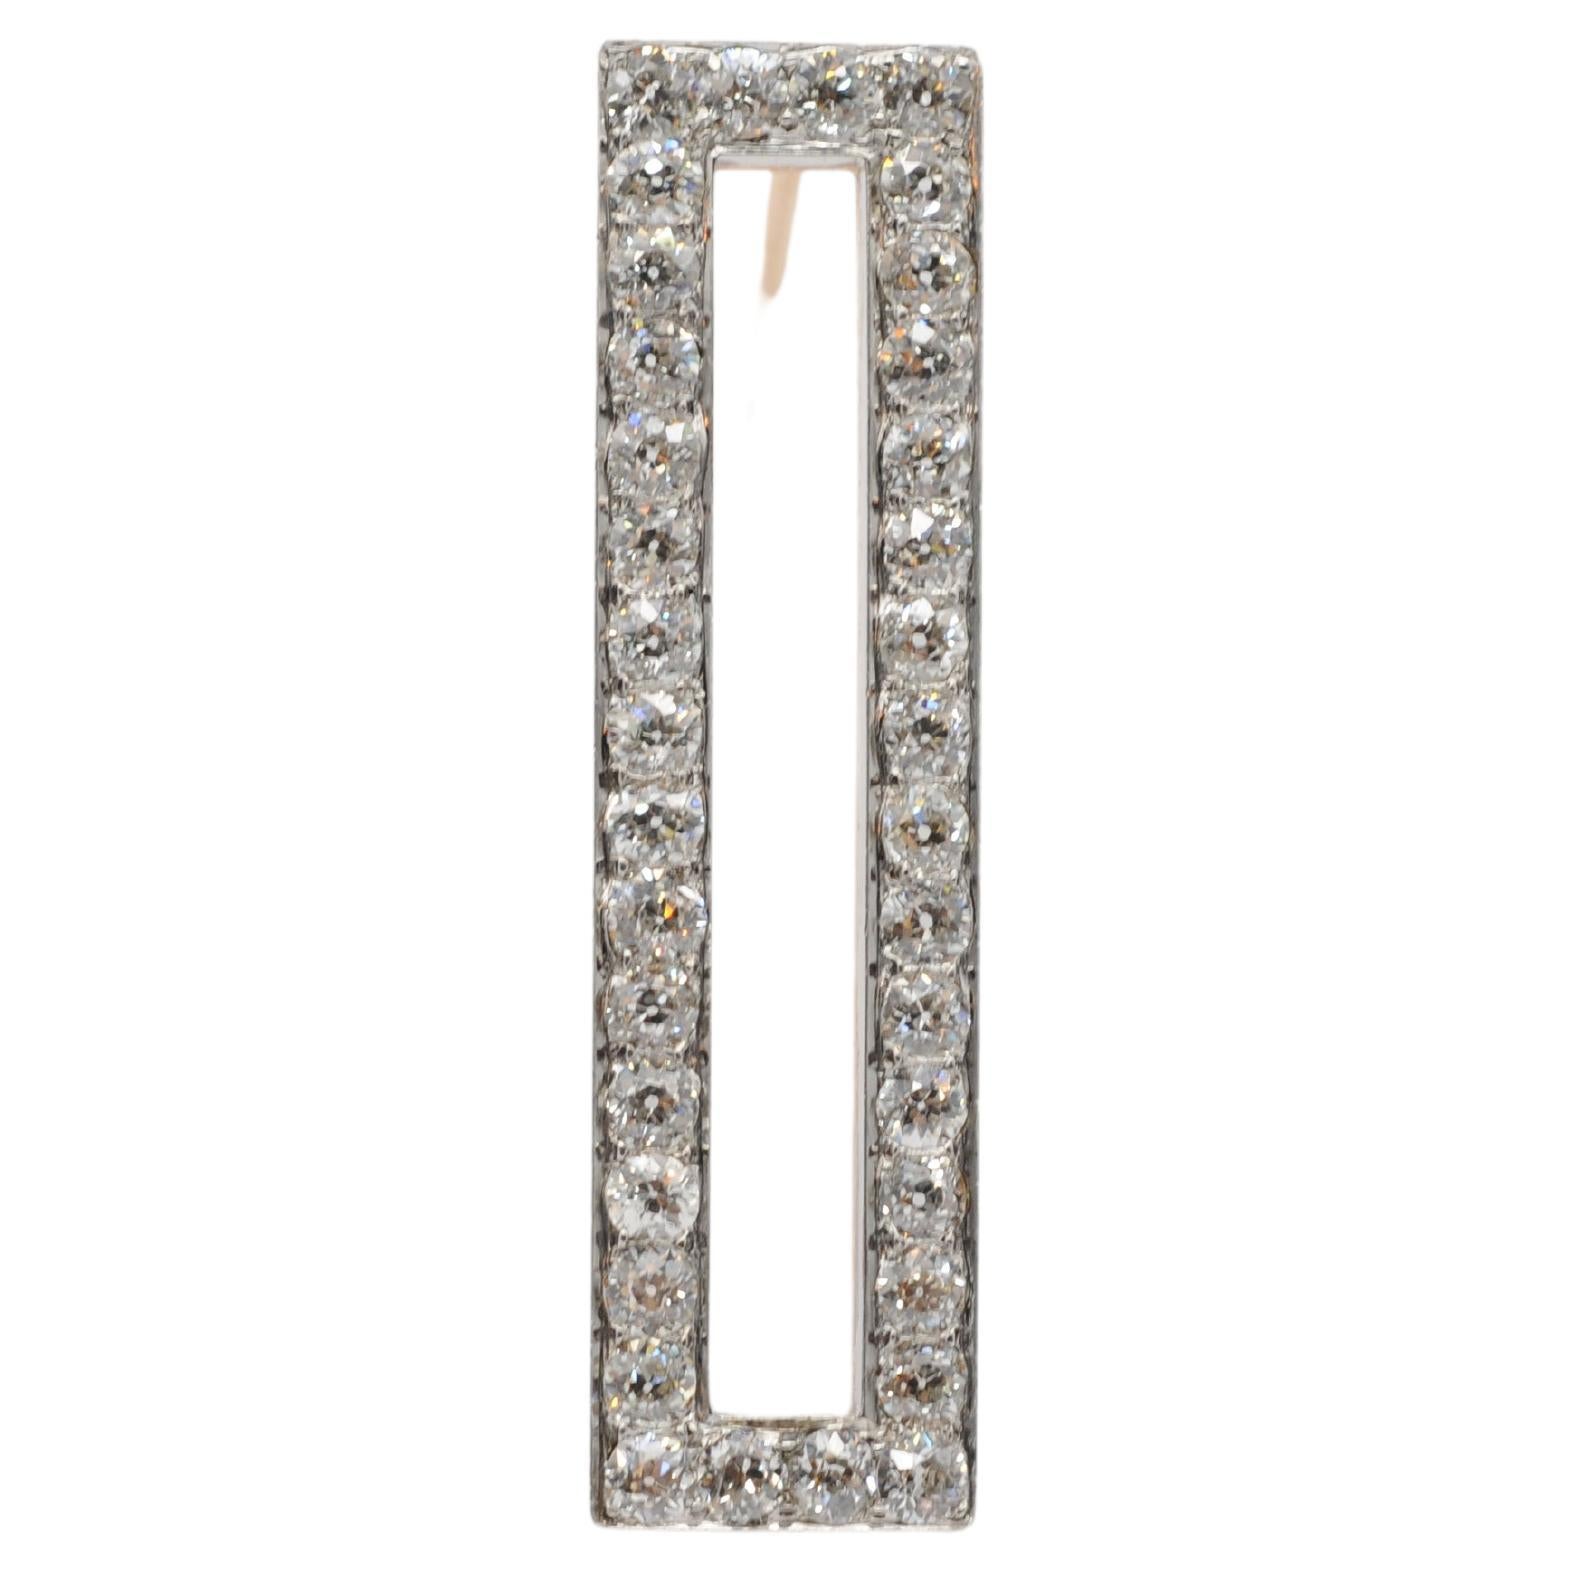 Art Deco brooch with diamonds stunning in 18k rosegold/whitegold